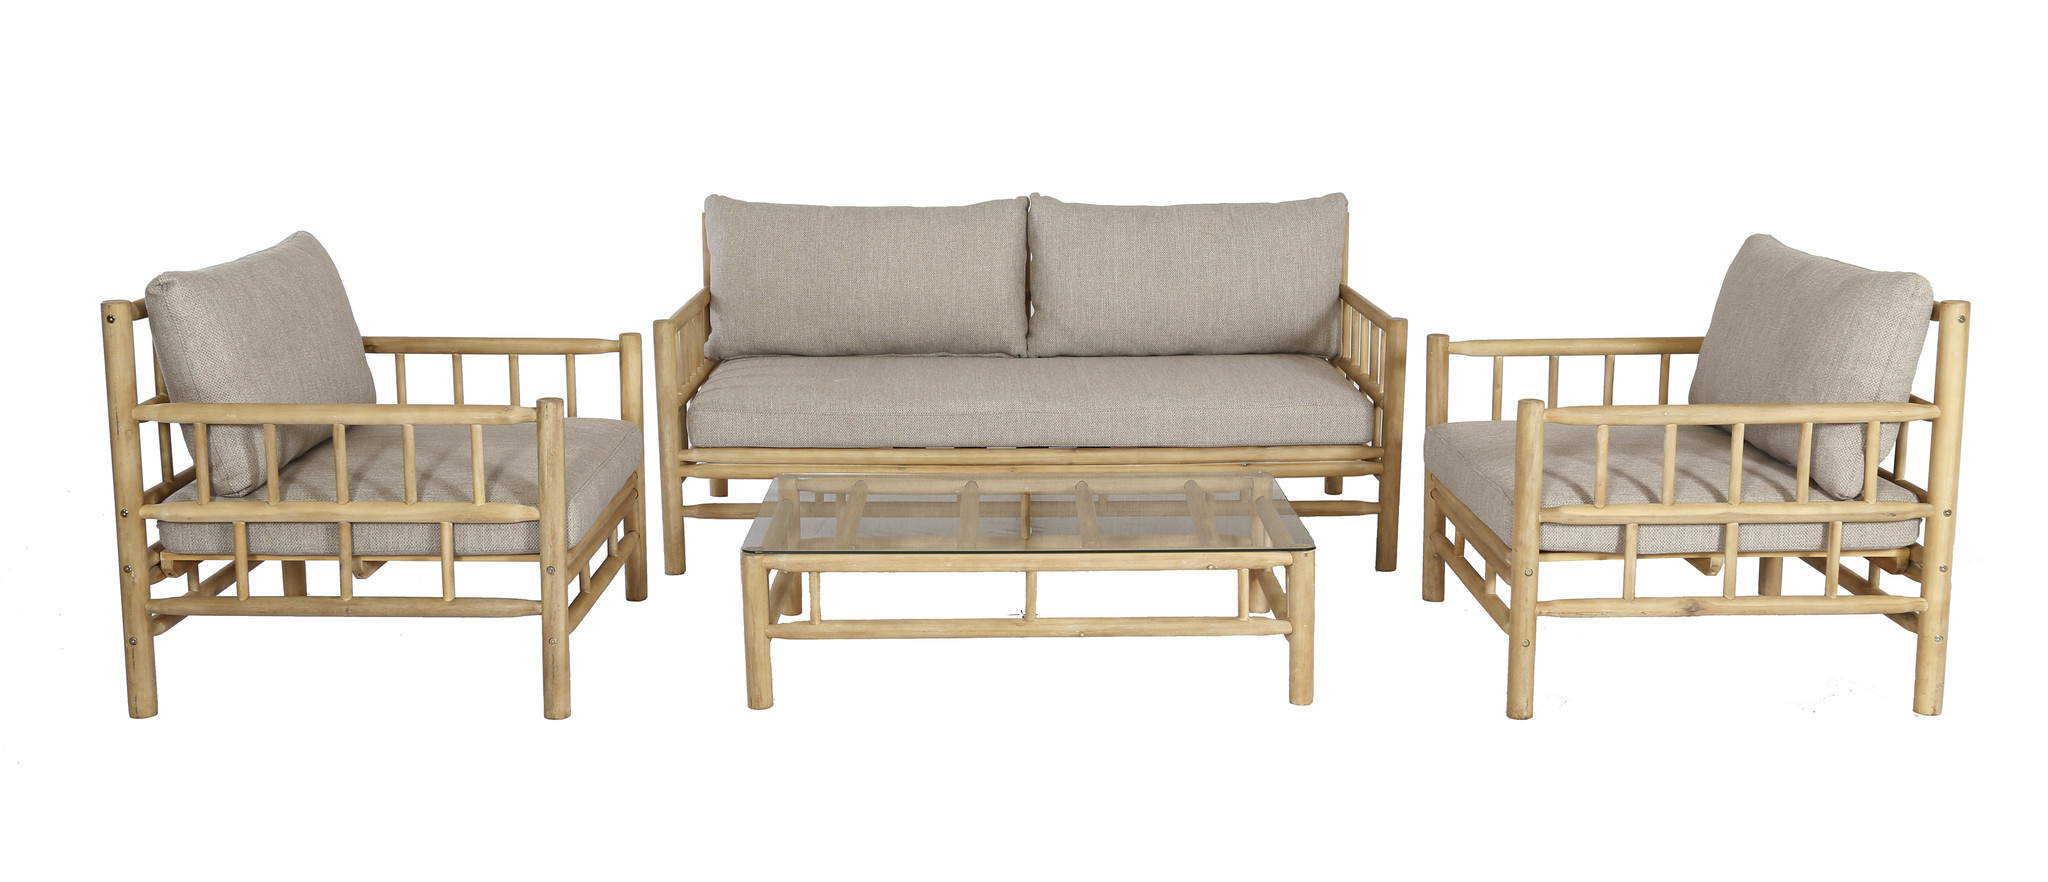 Das Outsider Loungeset Costa Rica Bamboo Look Acaciahout